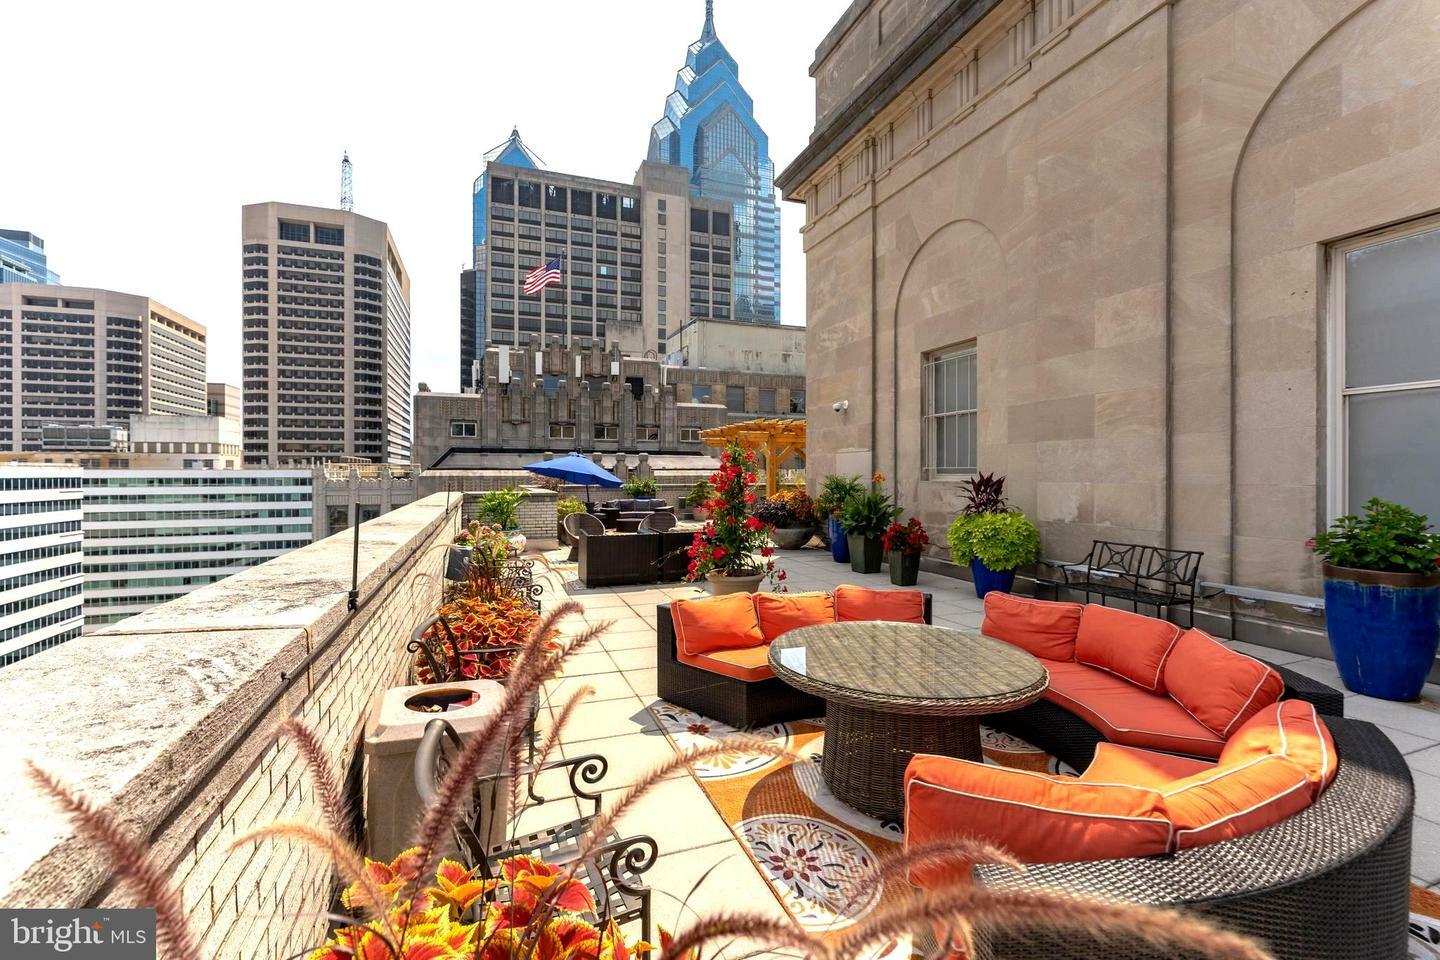 Stunning rooftop terrace in Philadelphia, beautifully landscaped with lush greenery and offering sweeping city views.